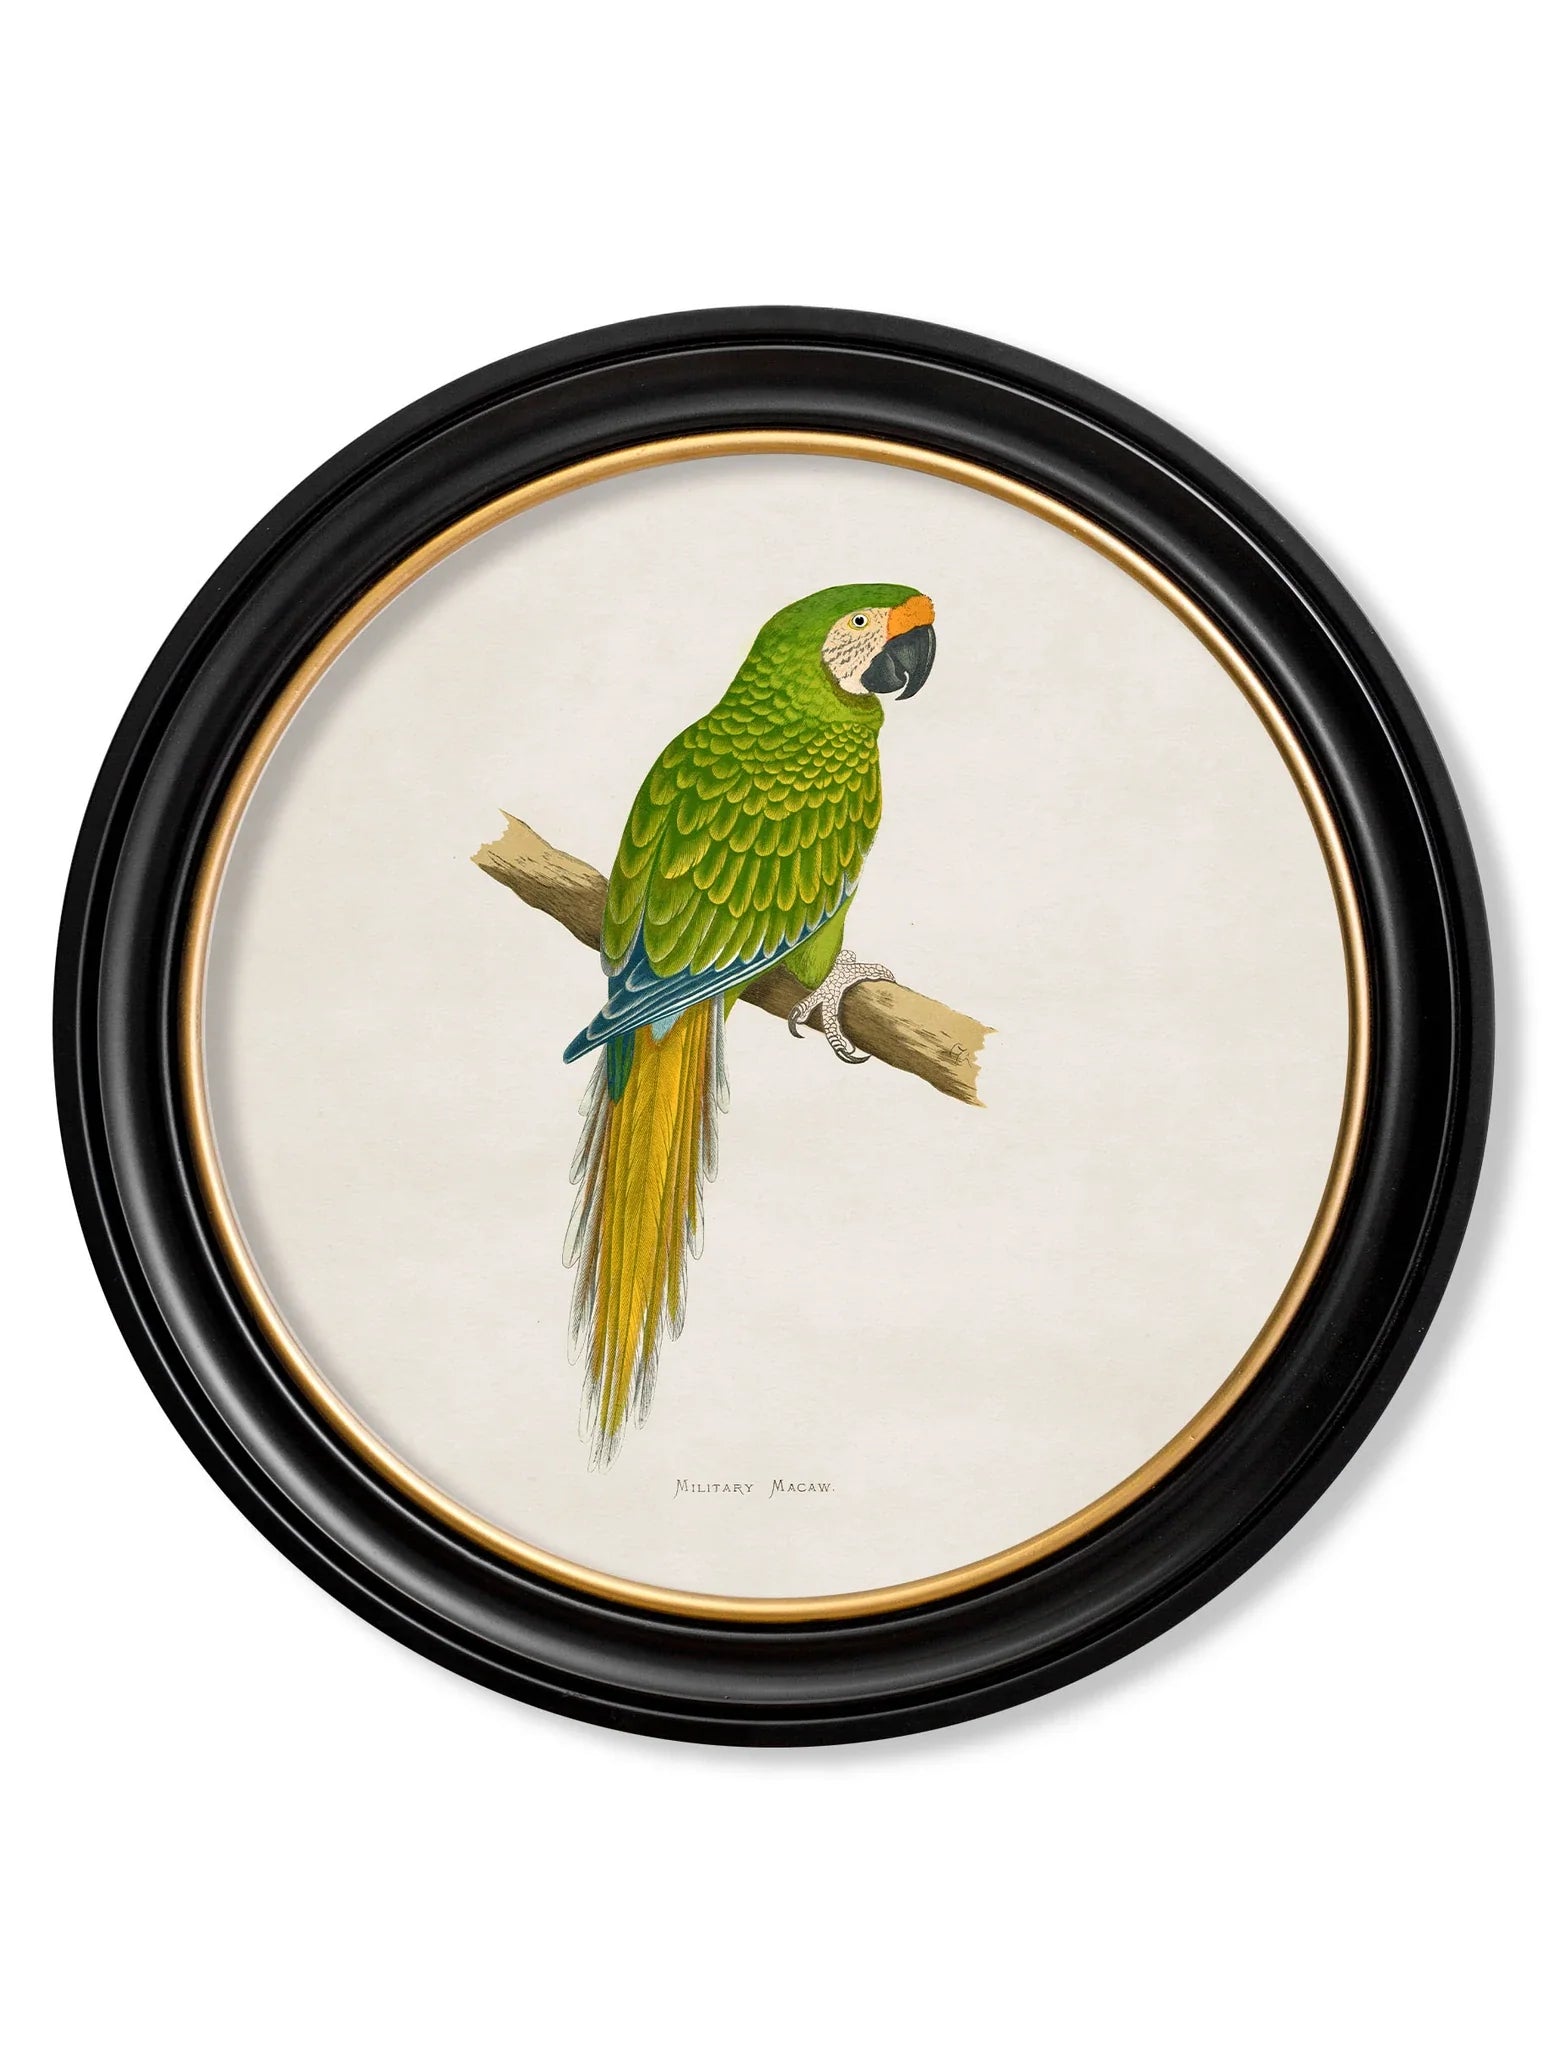 C.1884 Collections Of Macaws In Round Frames for sale - Woodcock and Cavendish